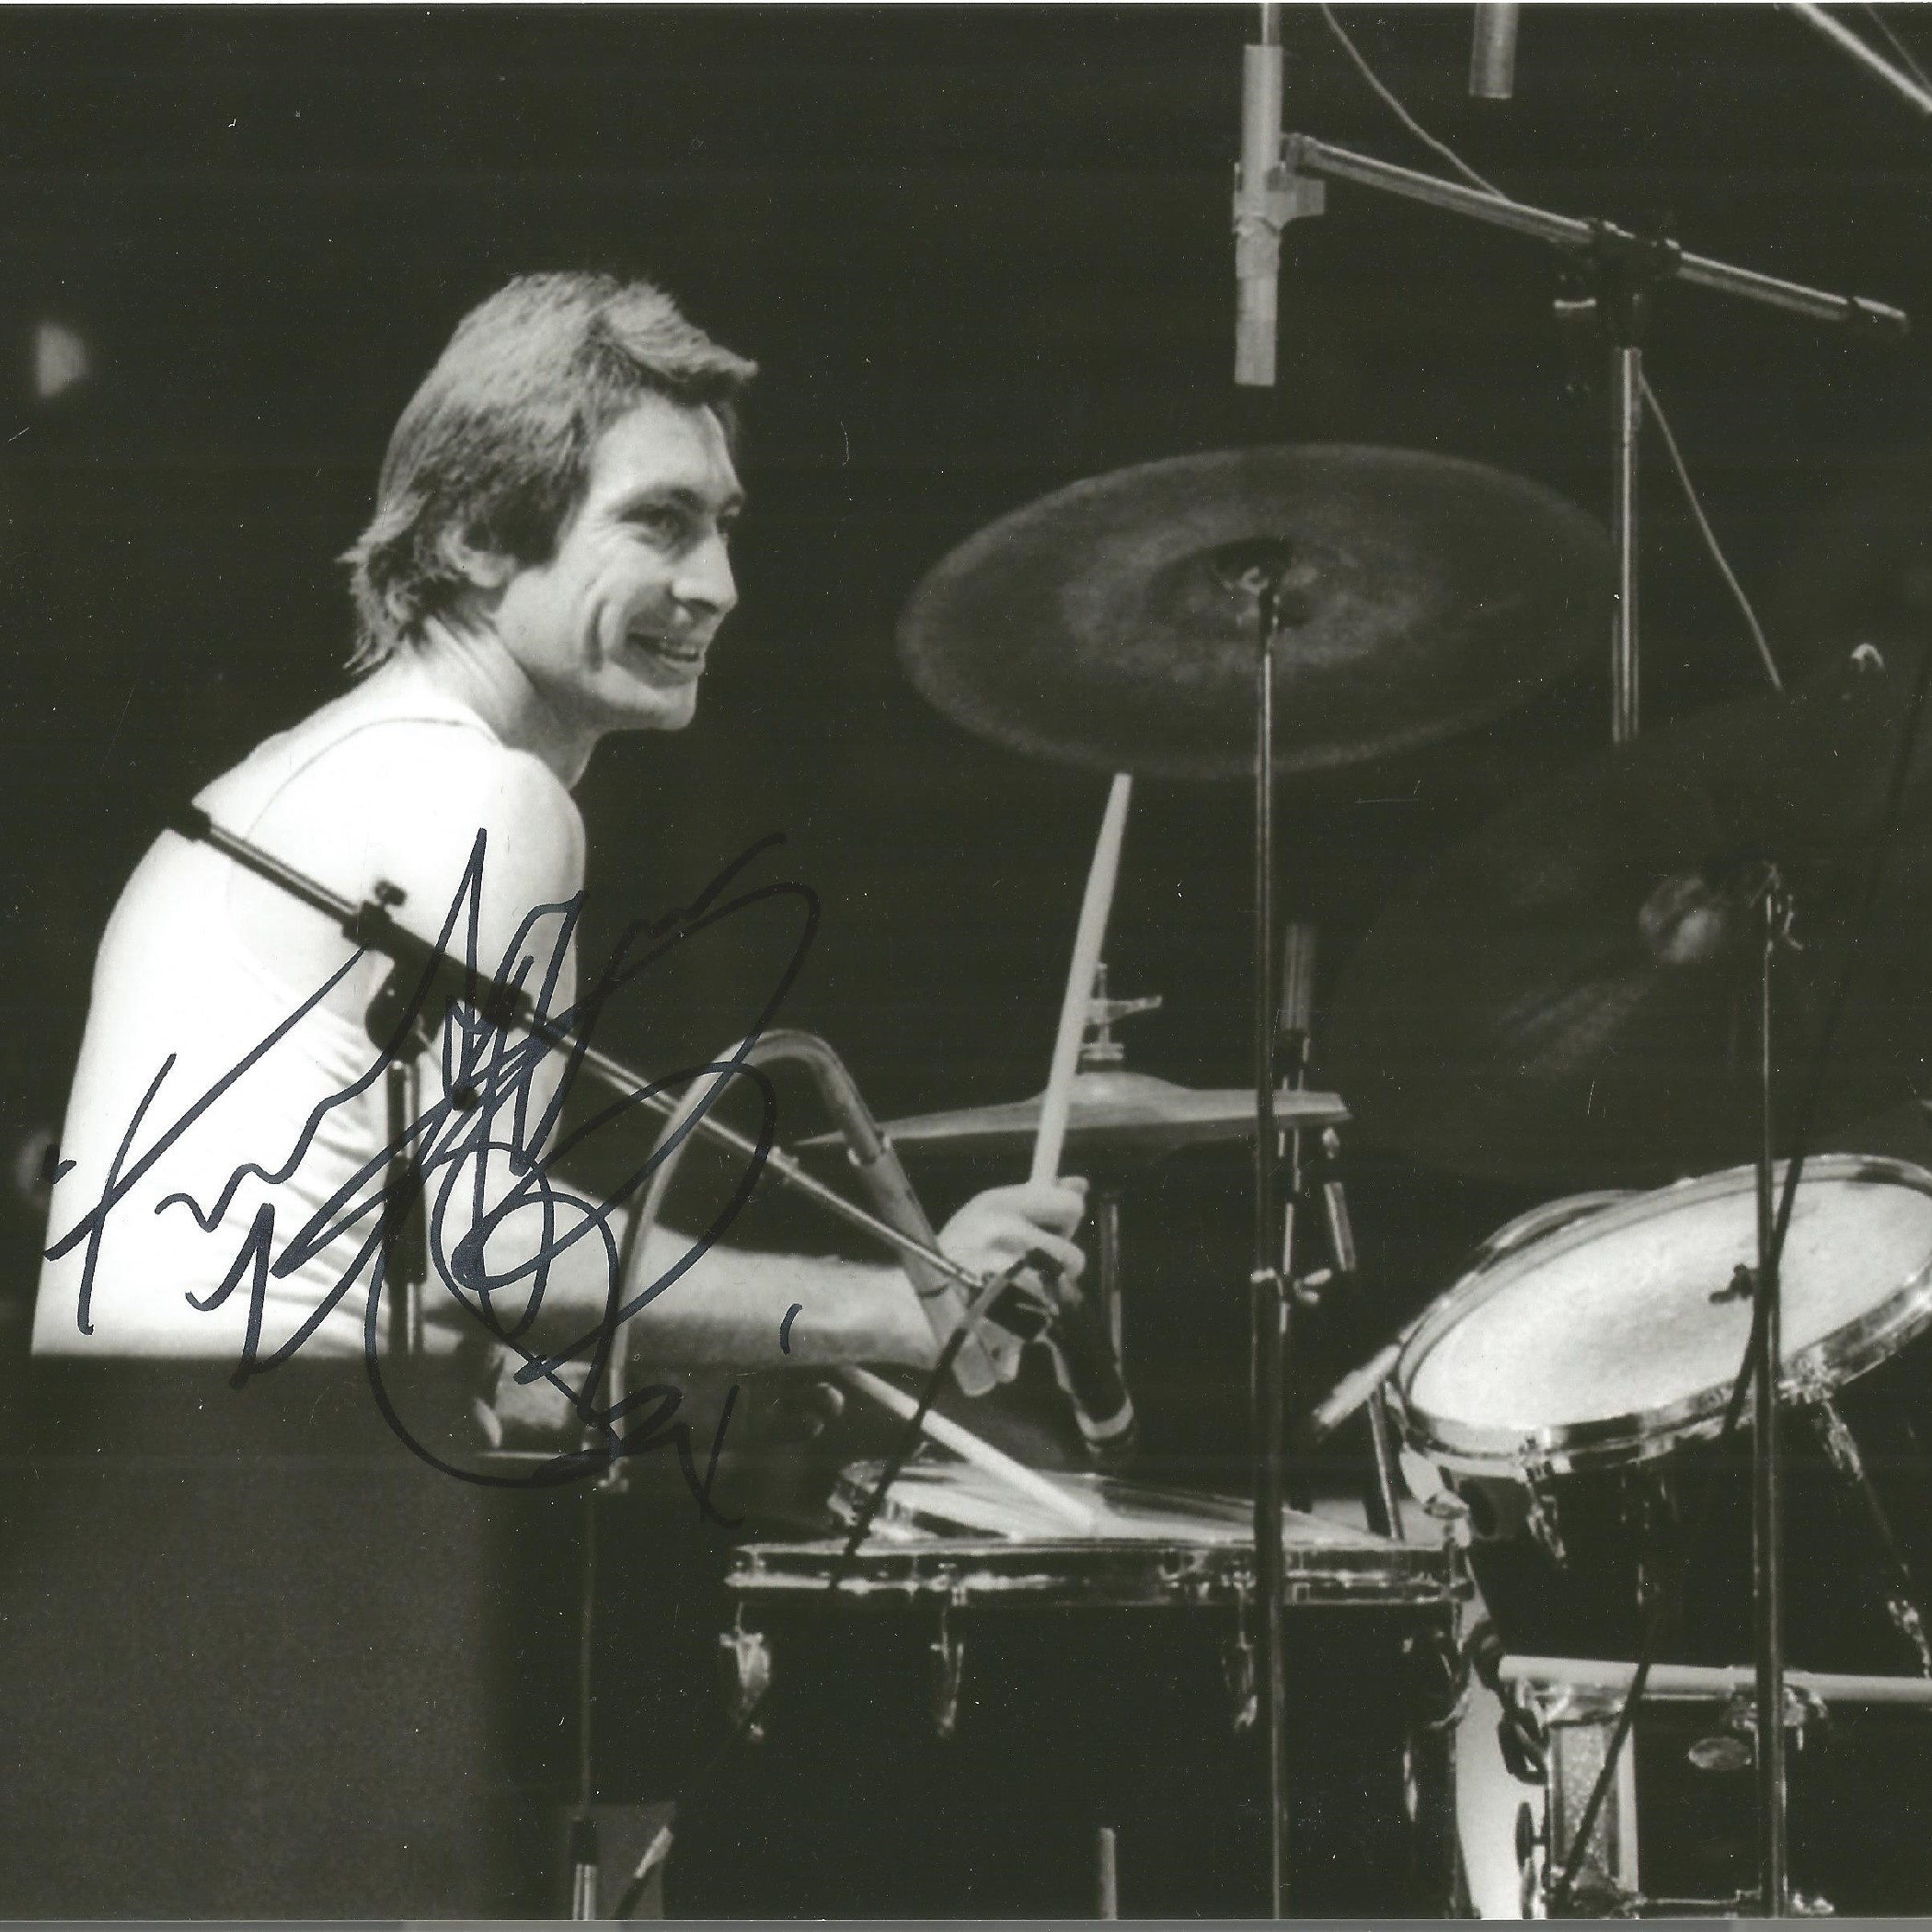 Charlie Watts signed 10x8 B/W photo. Charlie Watts is best known as the drummer for the Rolling